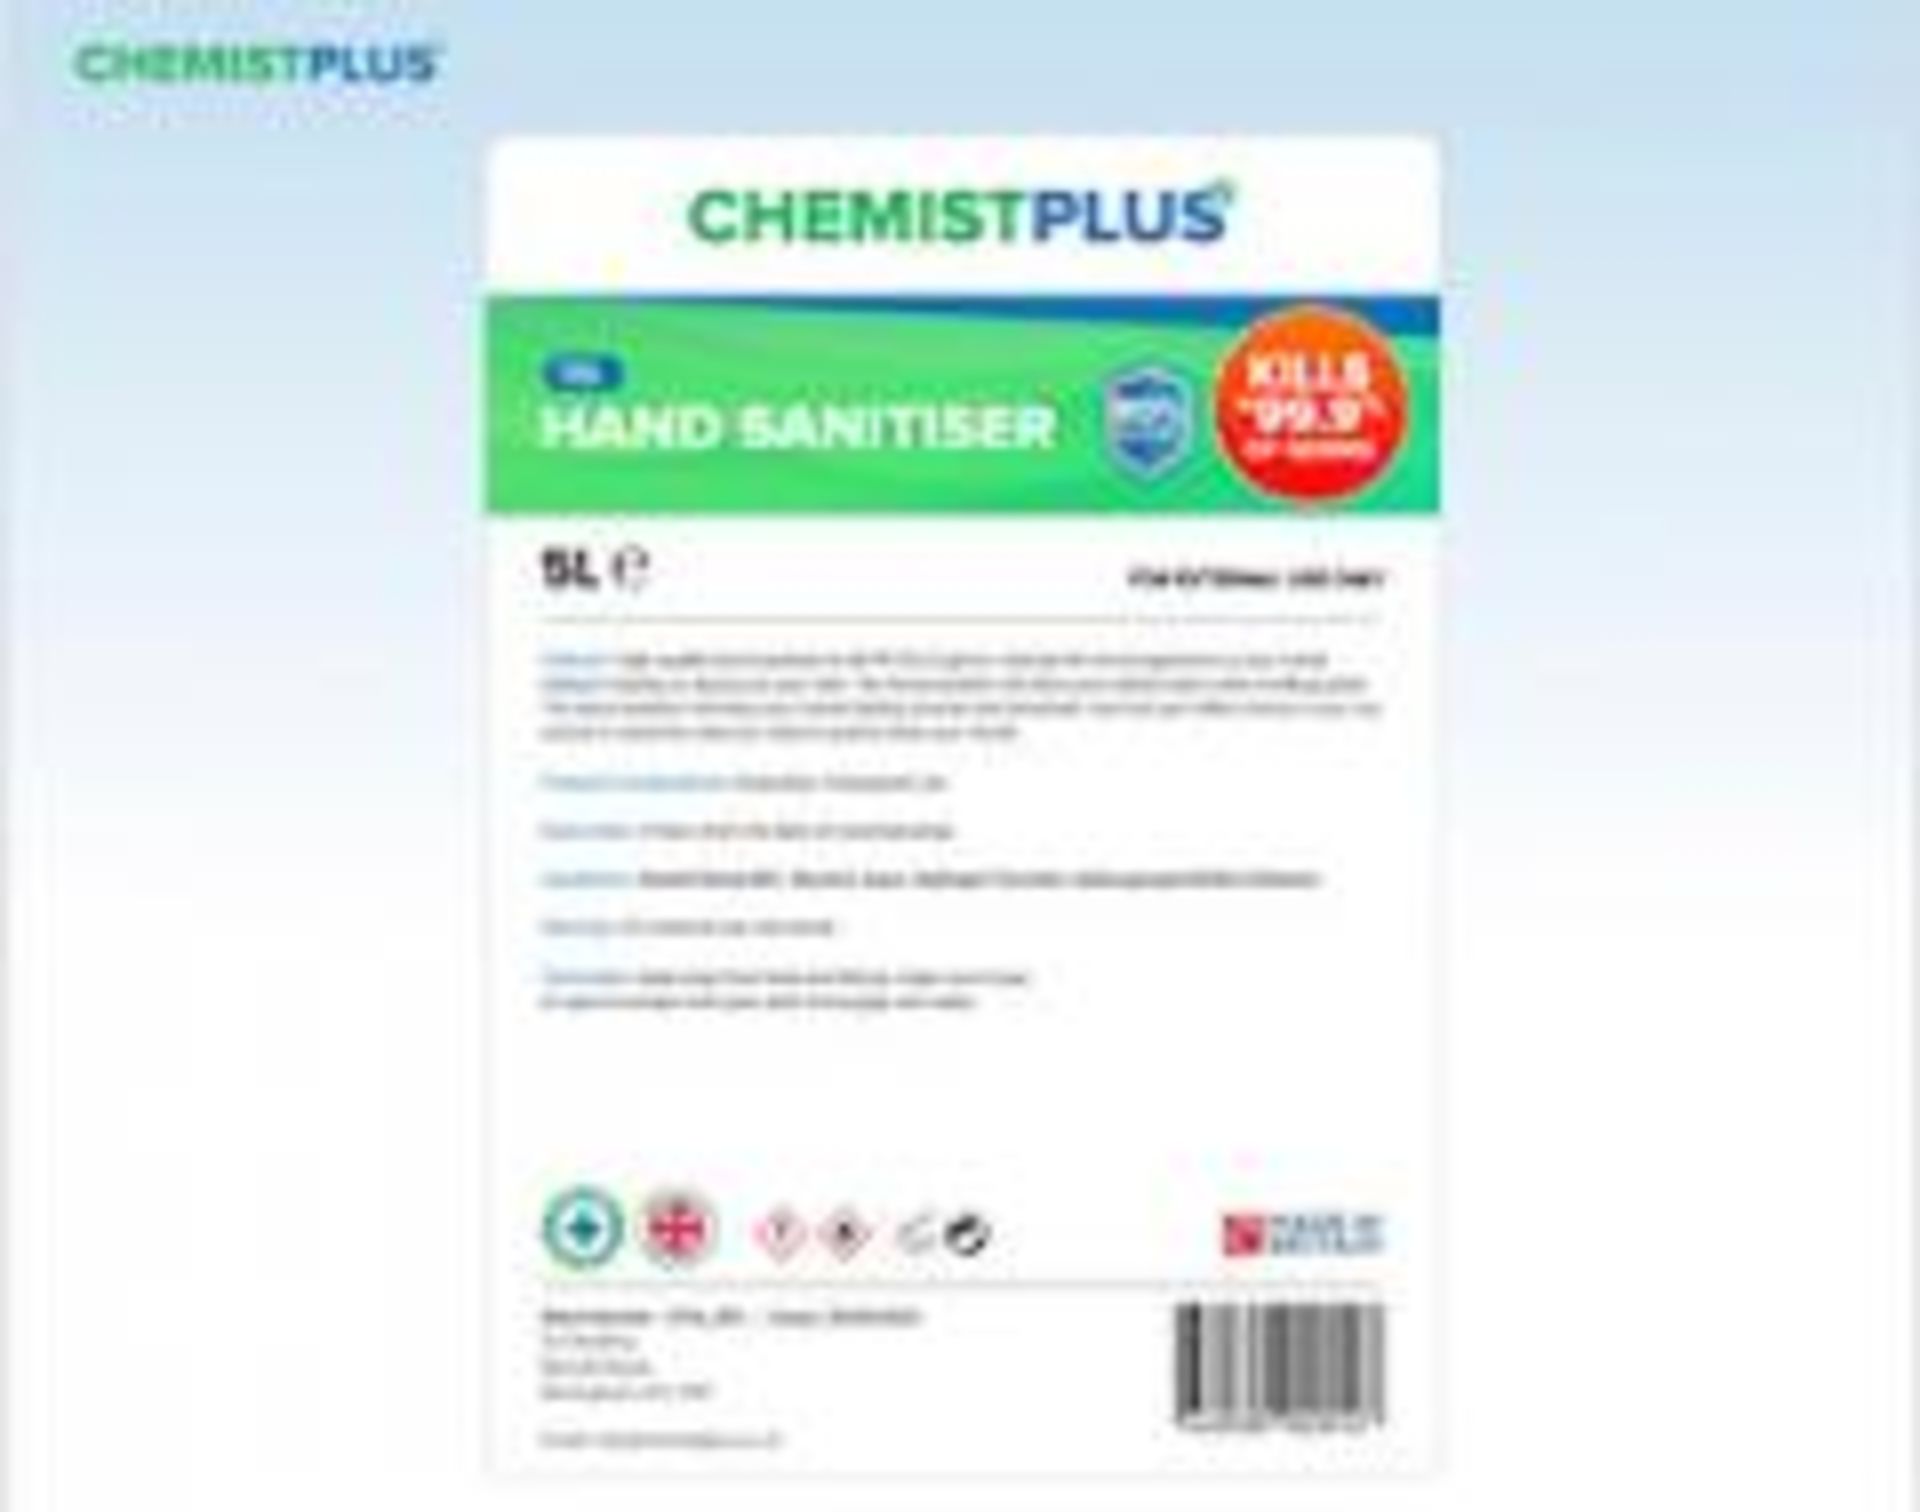 Lot of 10 x 5 Litre Hand Sanitiser by Chemist Plus - Image 2 of 2